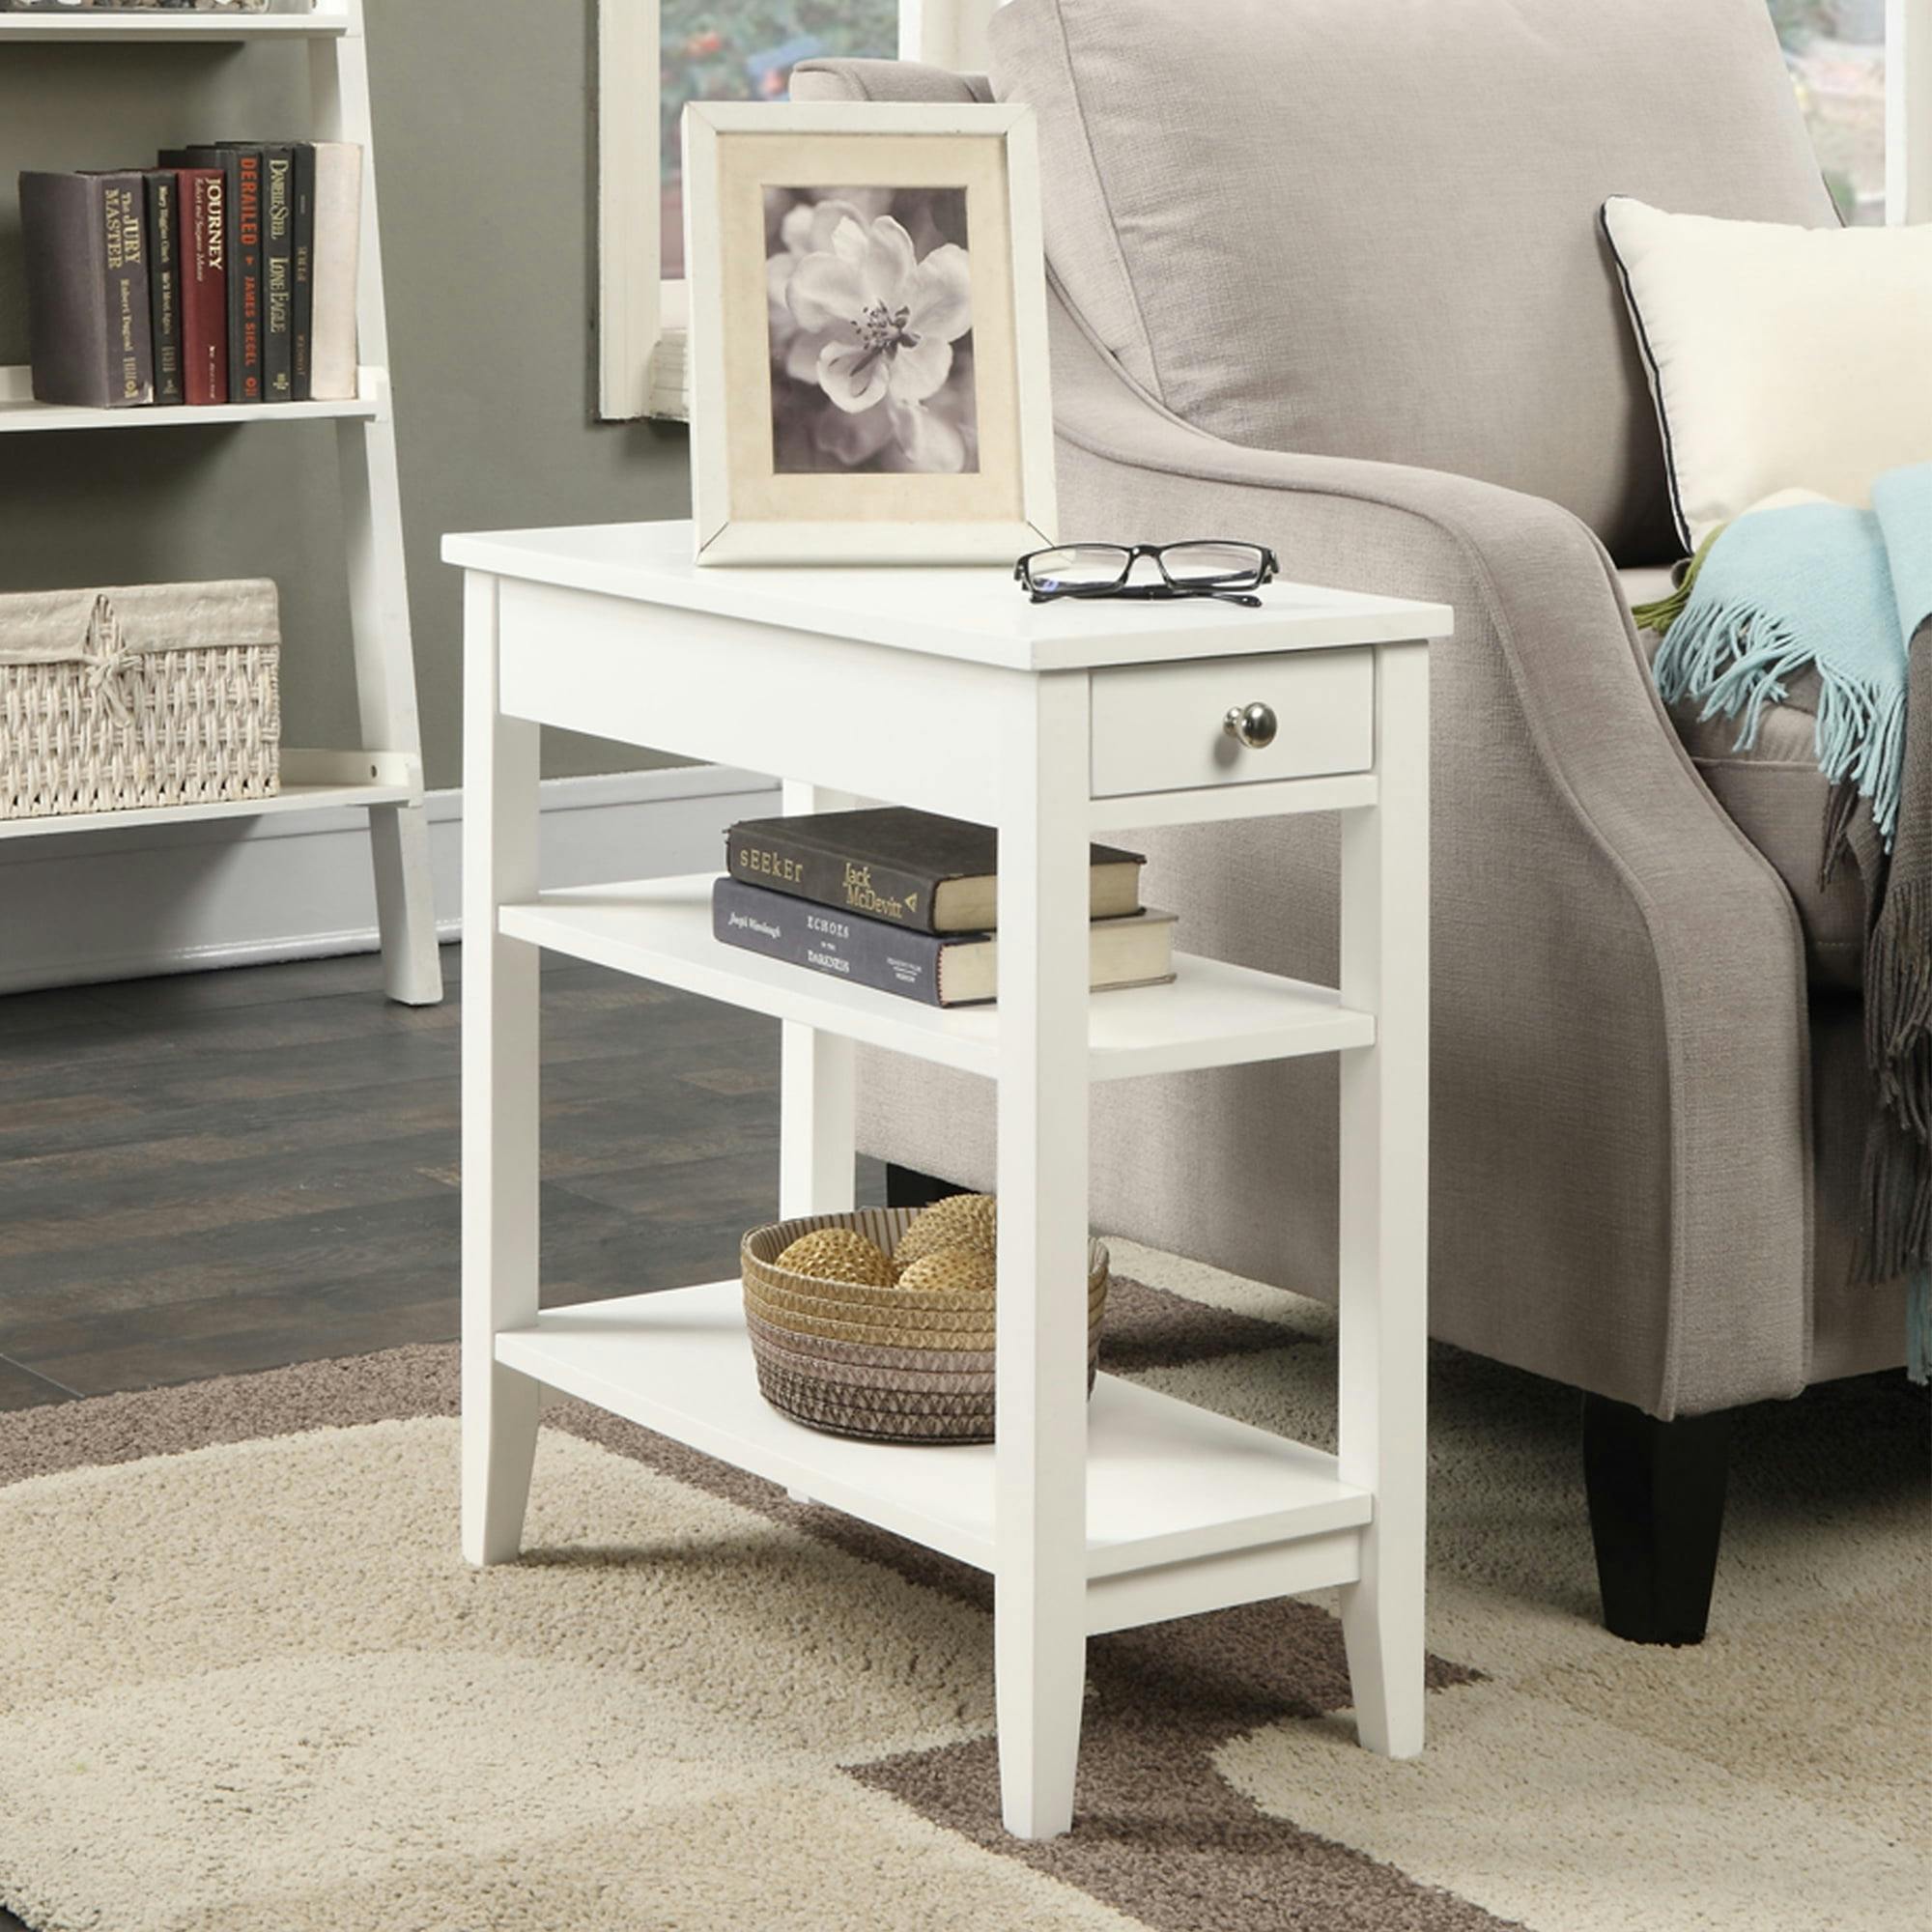 Classic Birch White 3-Tier End Table with Storage Drawer